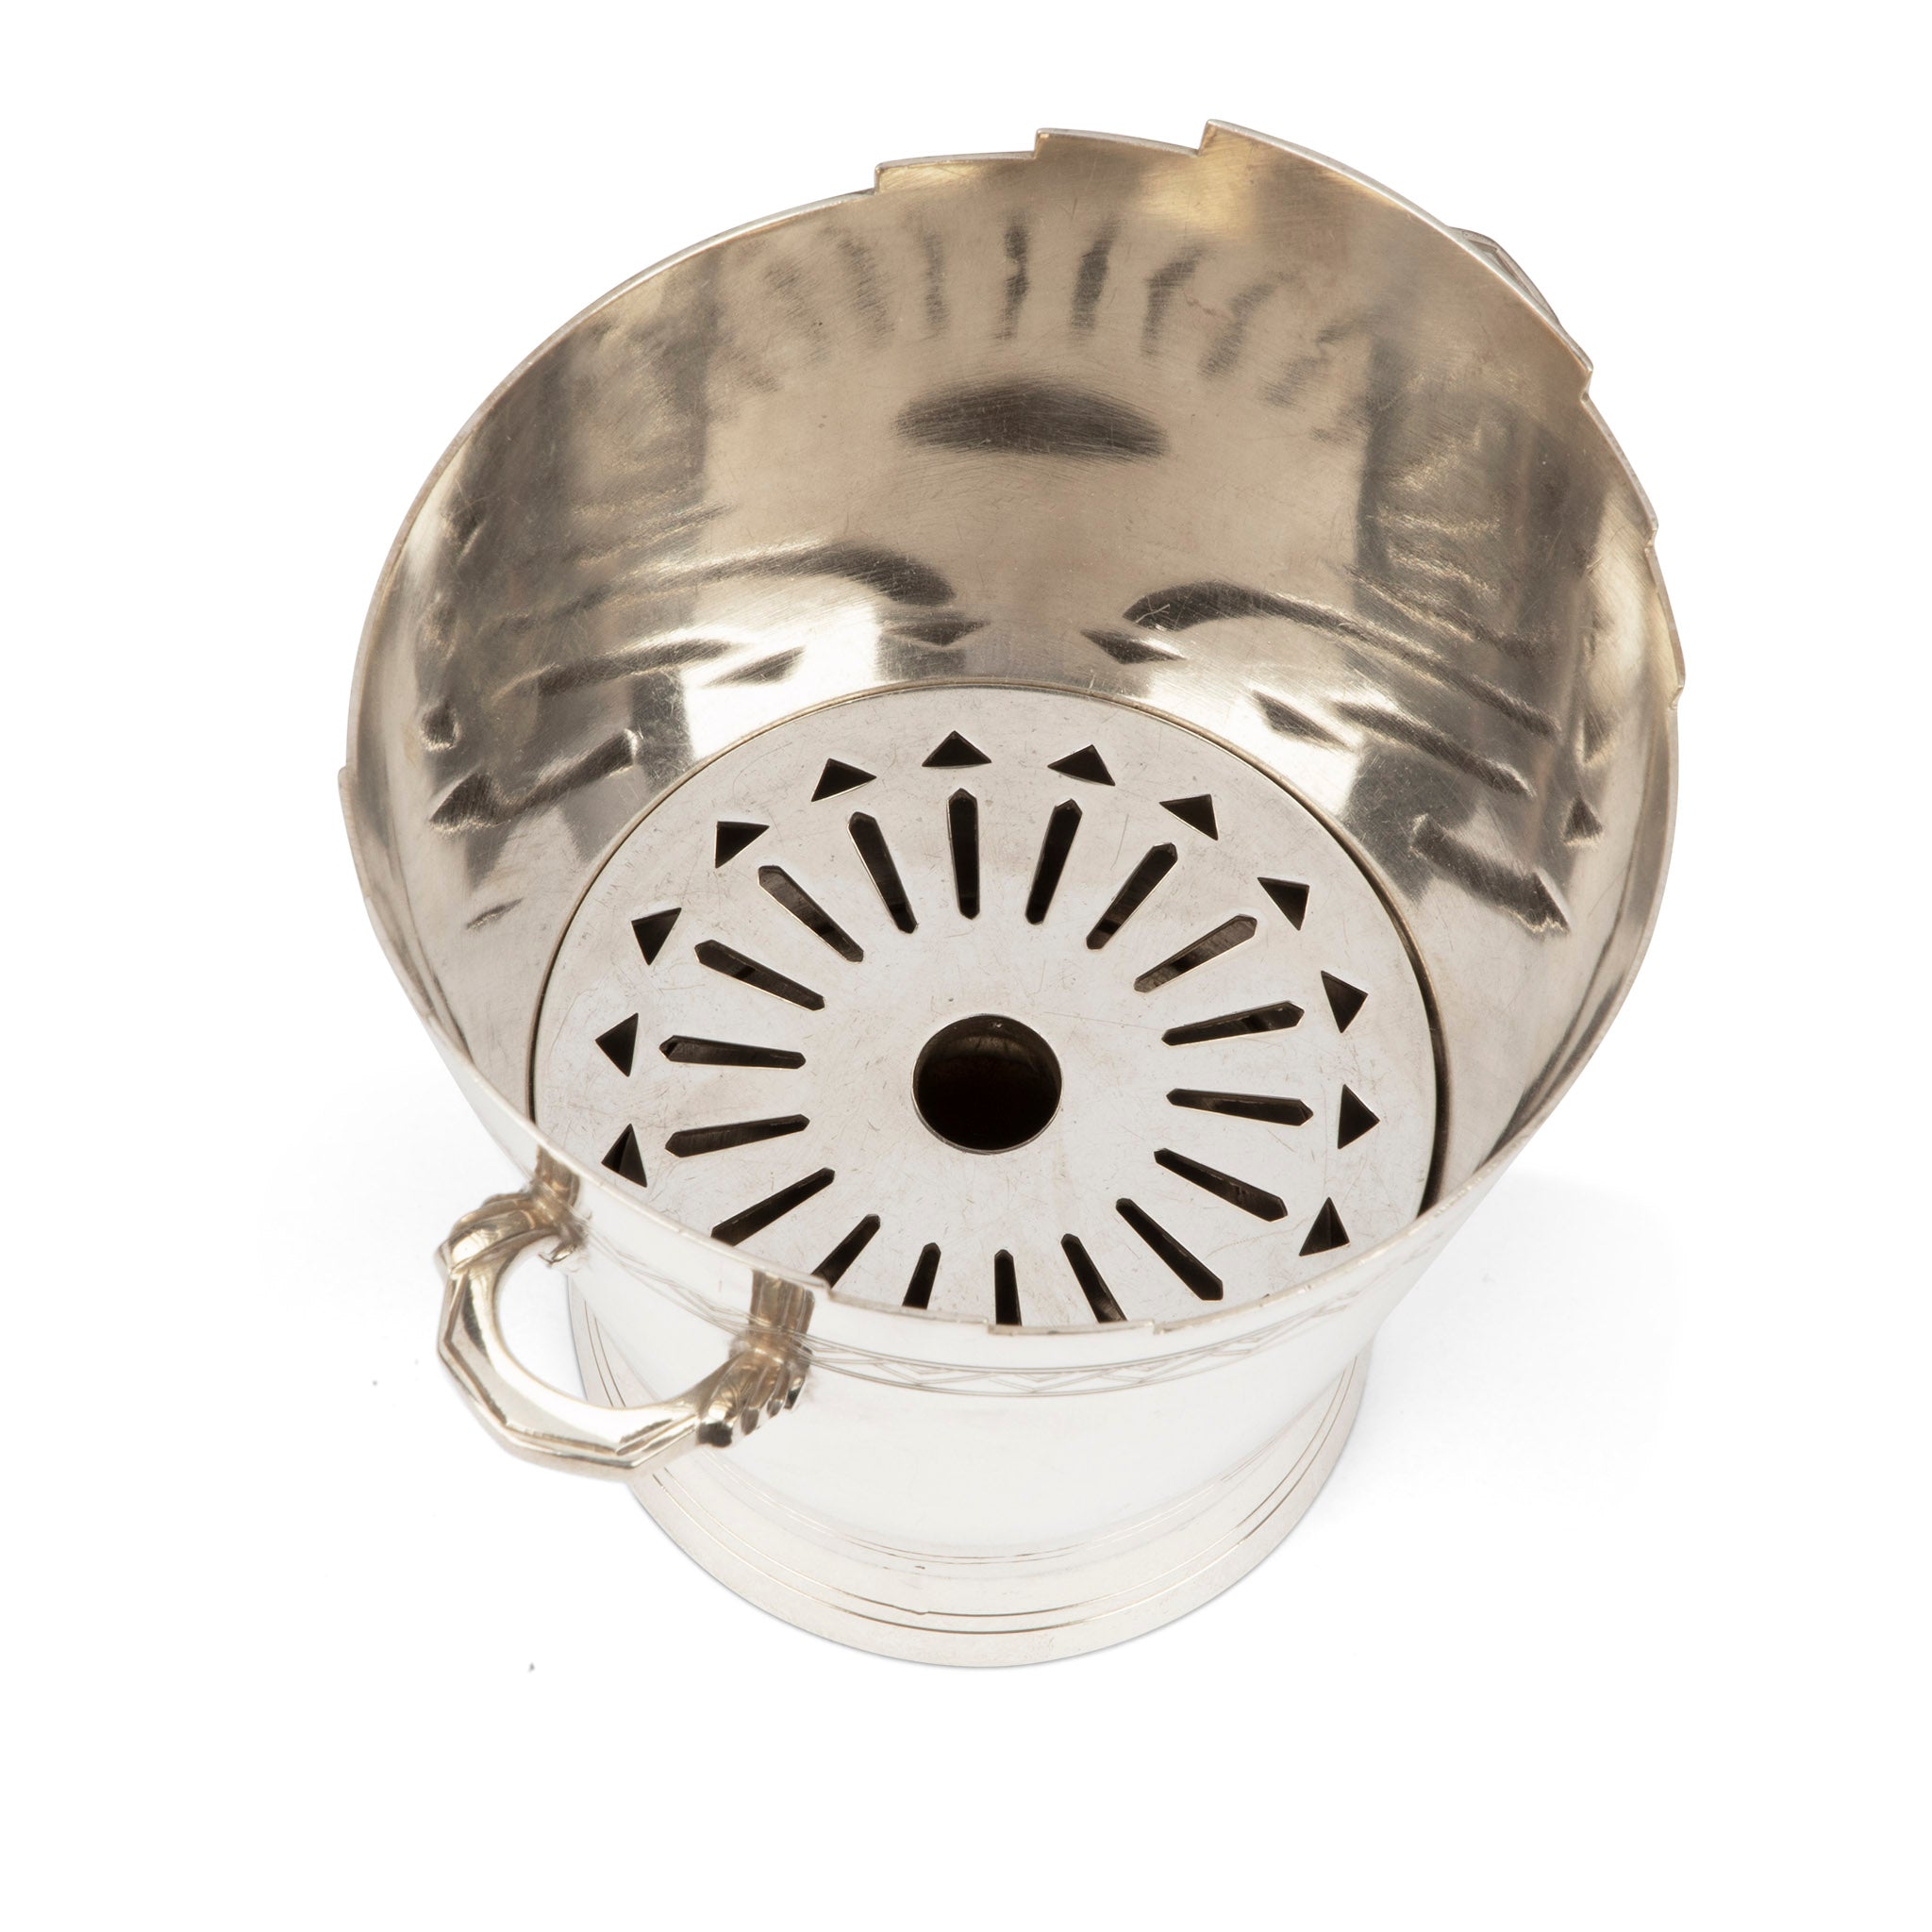 English Art Deco Silver-Plated Ice Bucket by Keith Murray